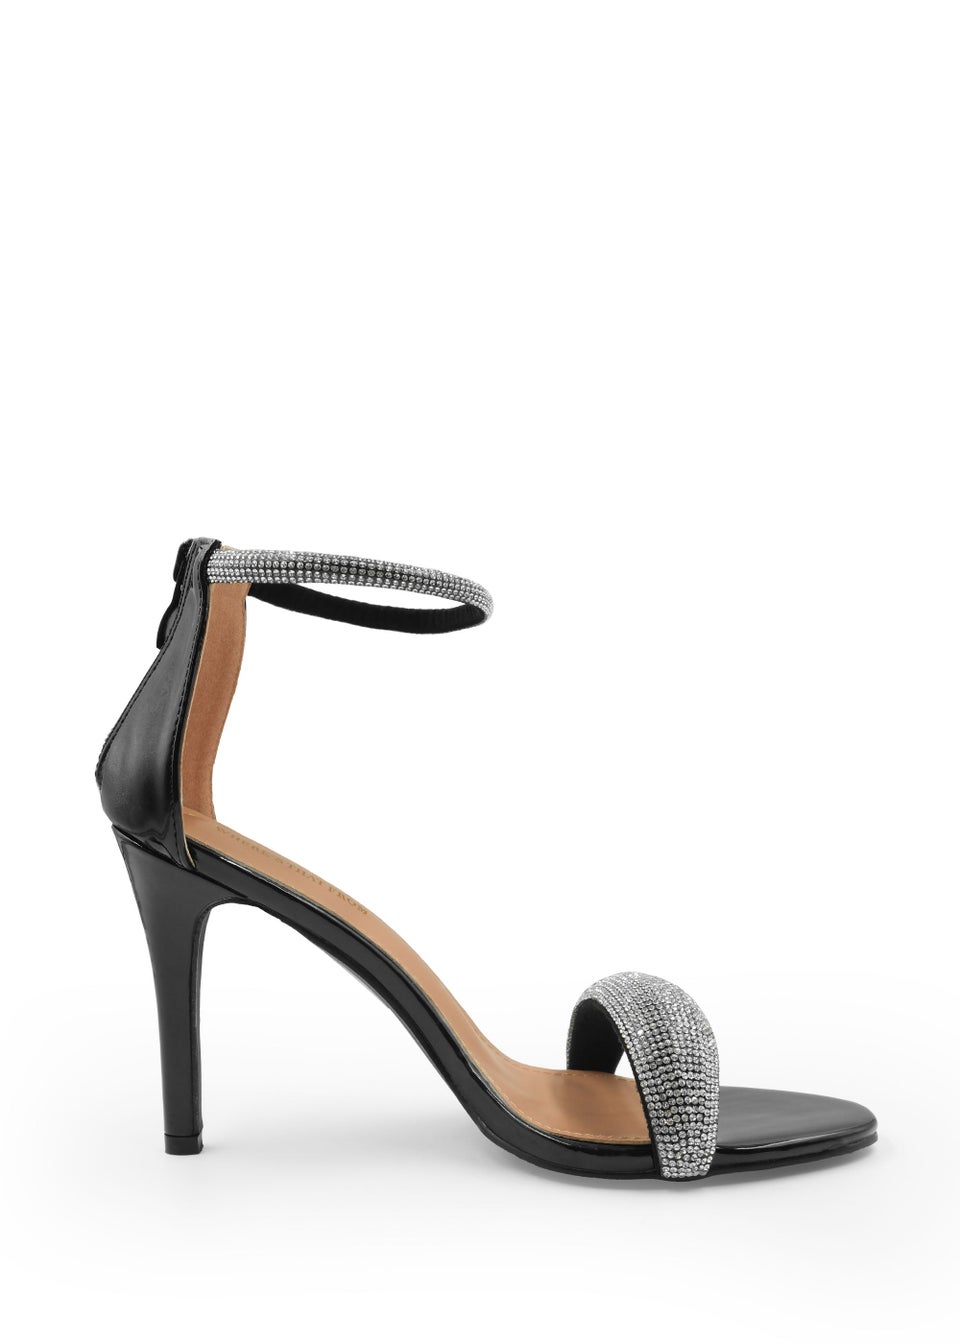 Where's That From Black Faux Leather Sabra High Heel Sandals